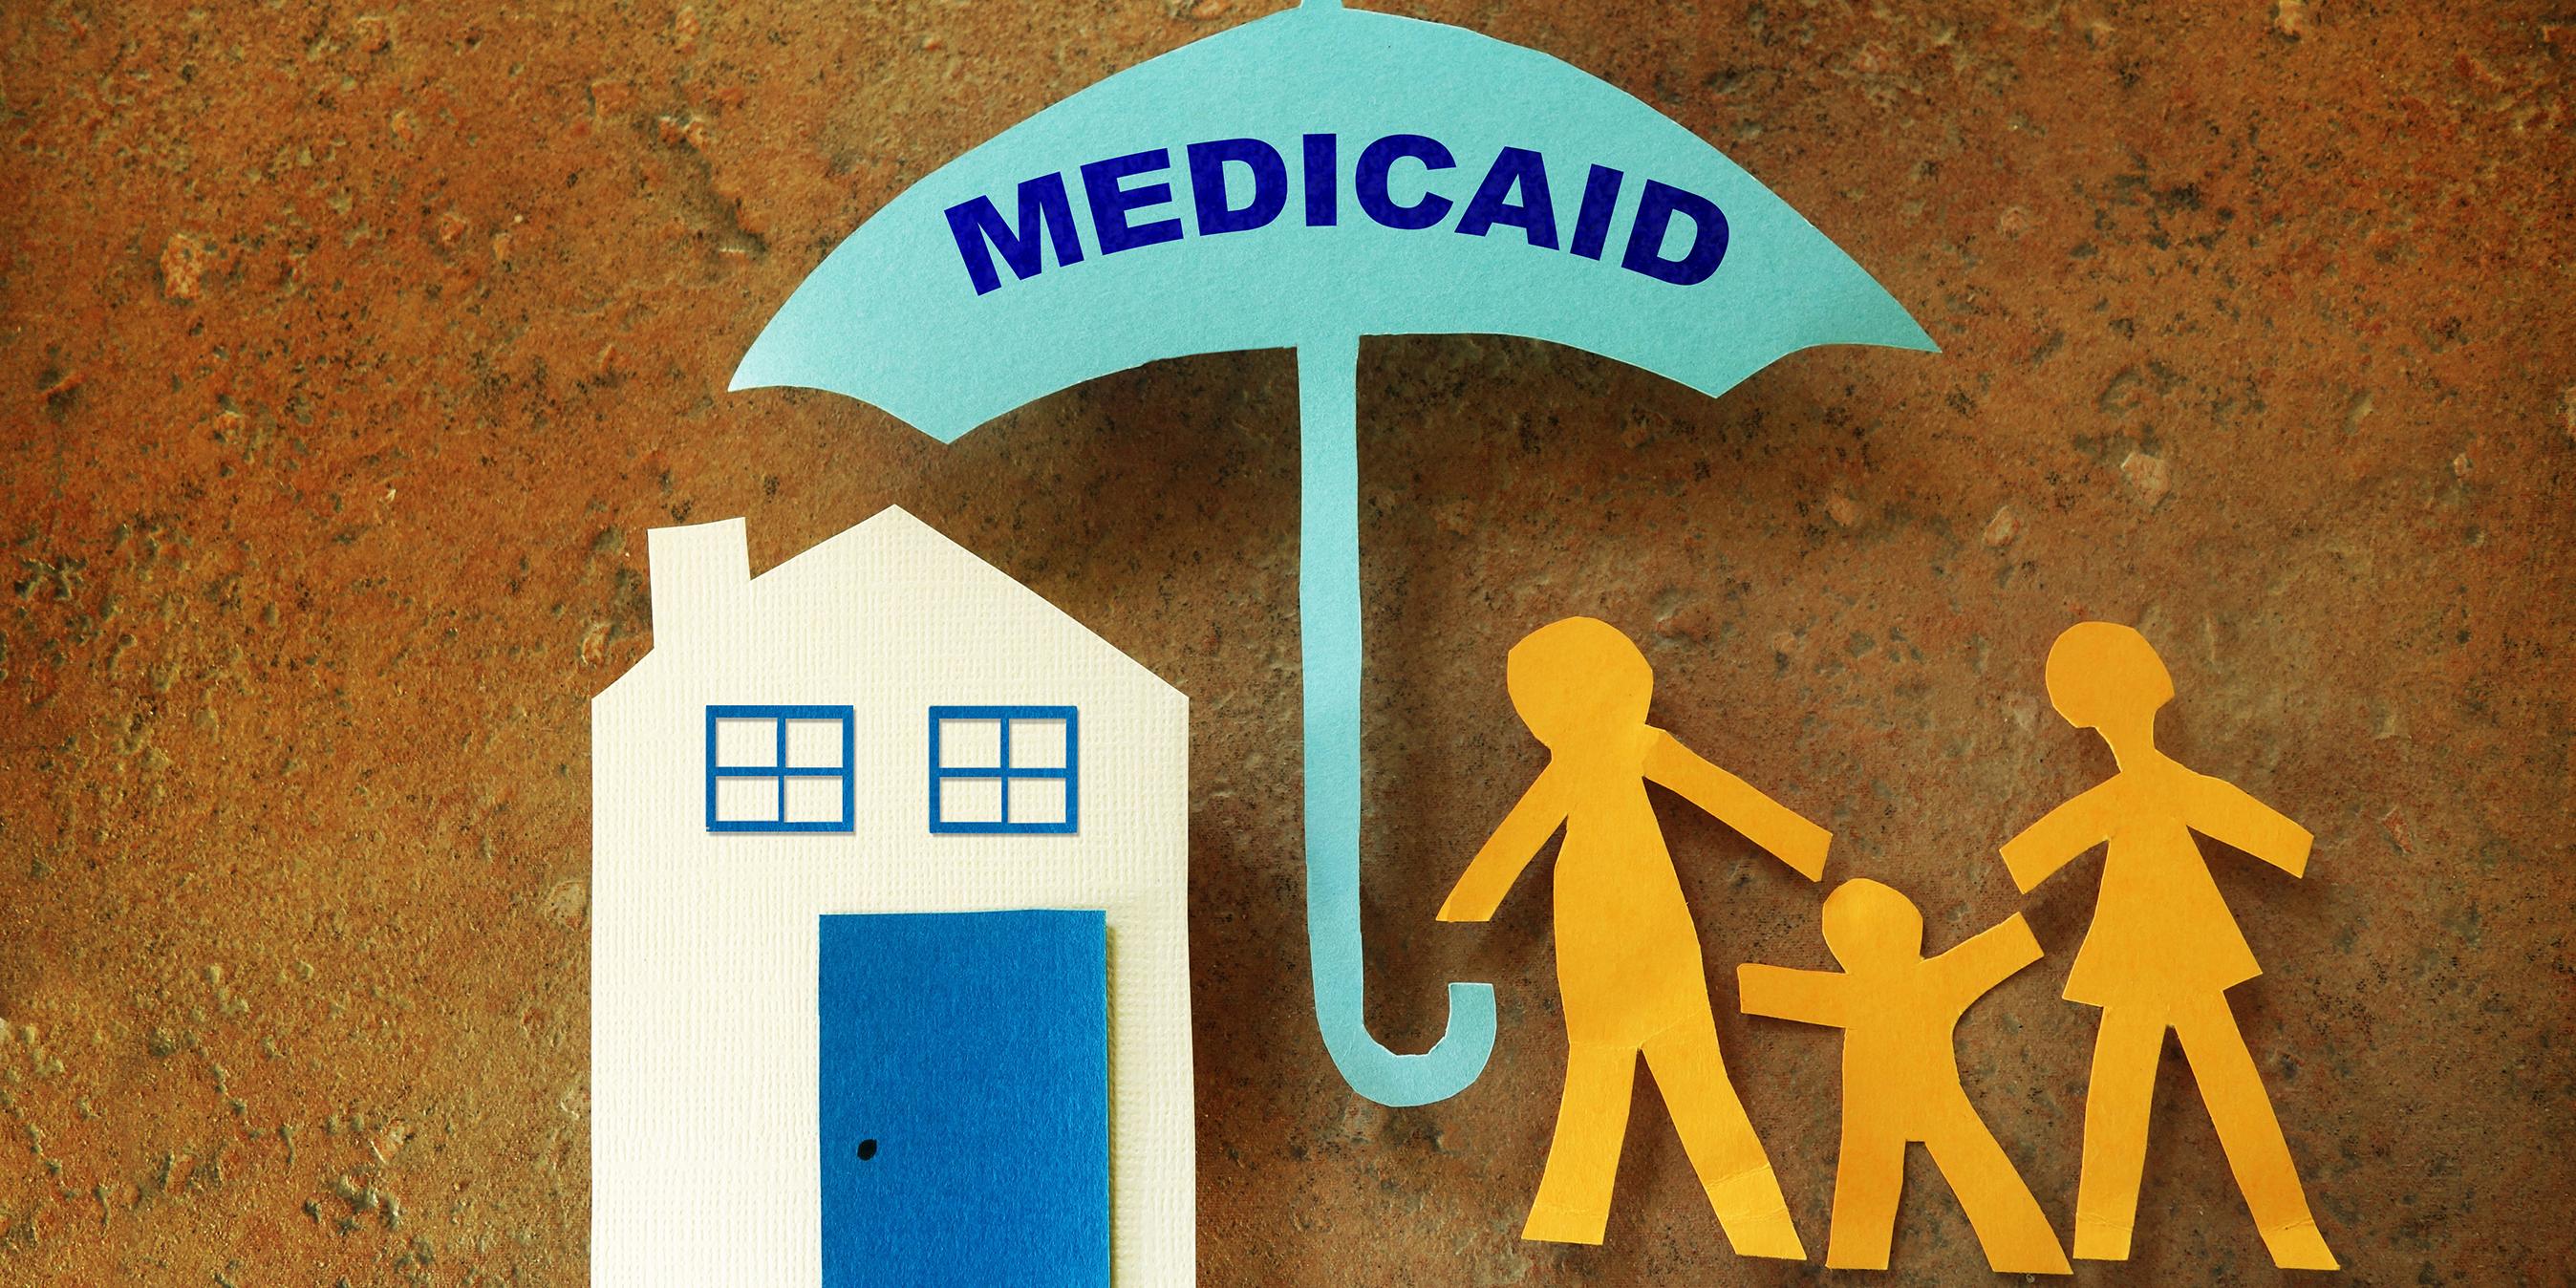 Paper cutouts depicting a house, a family, and a Medicaid umbrella protecting them